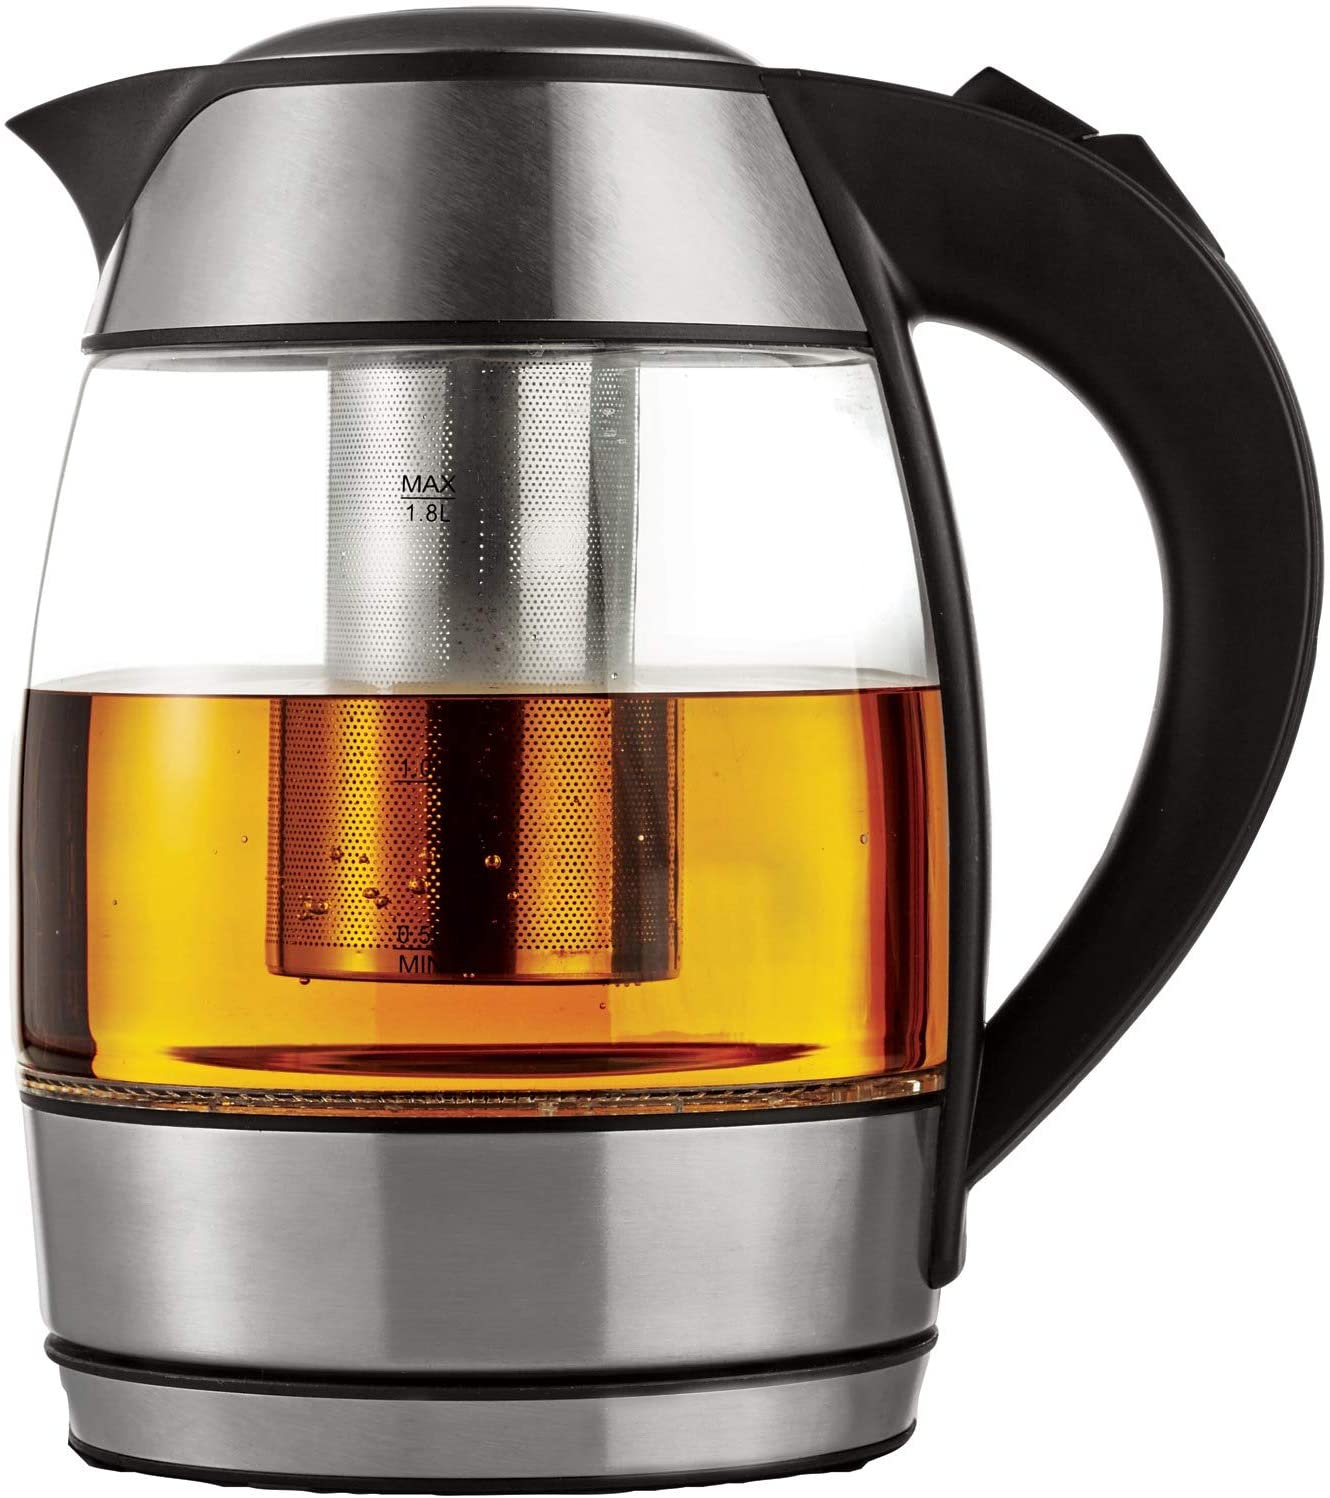 Brentwood Glass 1.7 Liter Electric Kettle With Tea Infuser In